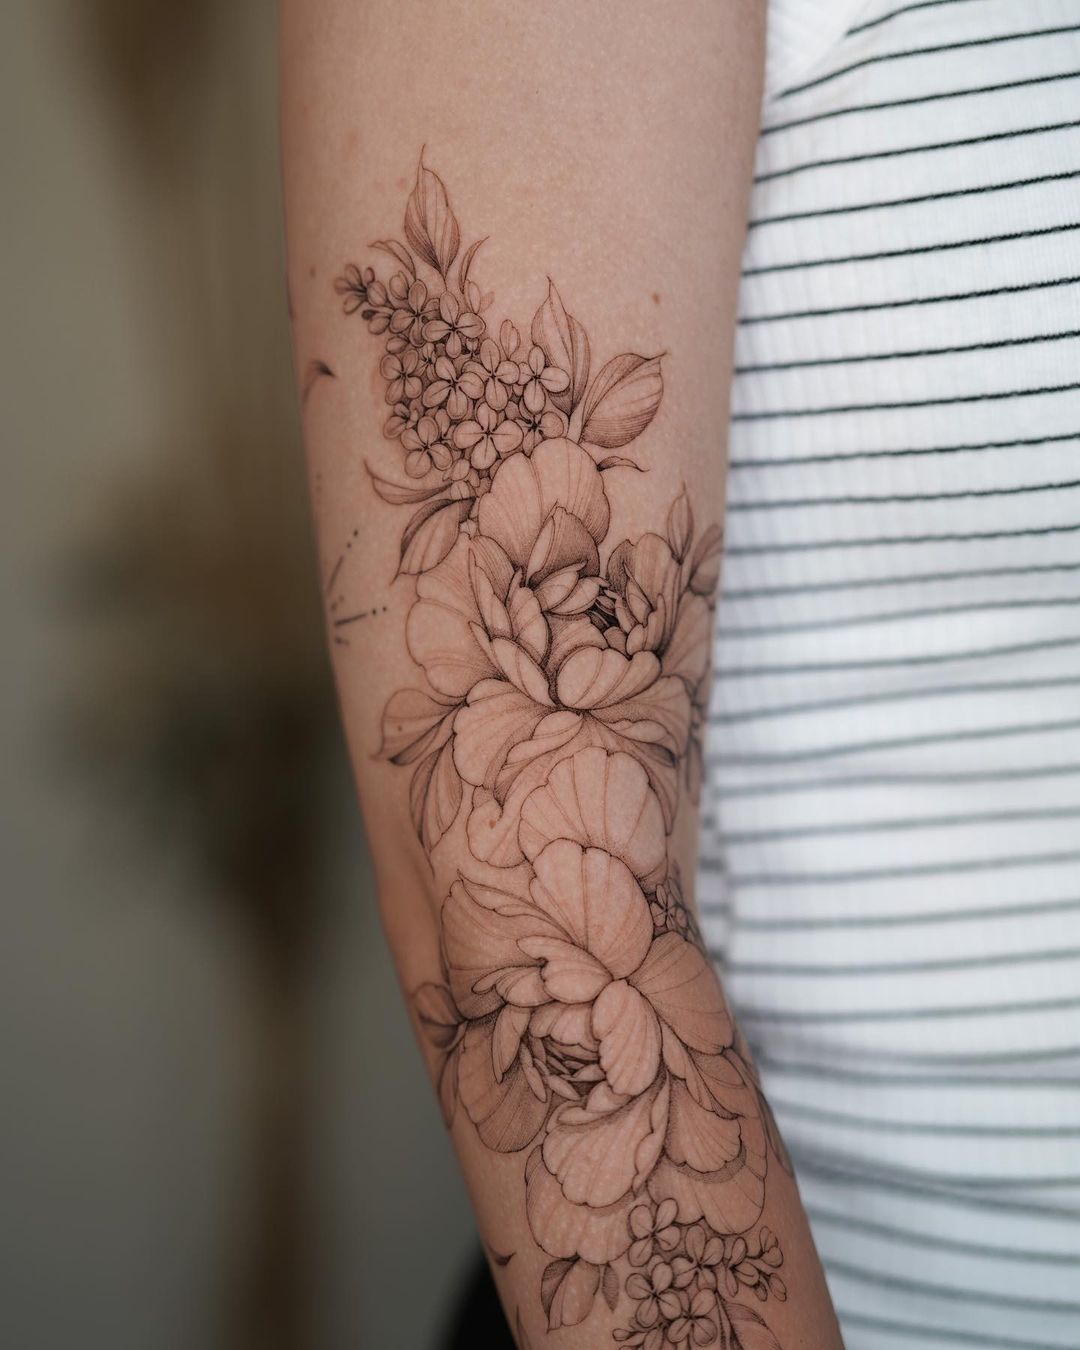 Black and White Peony Flower Tattoo on Arm